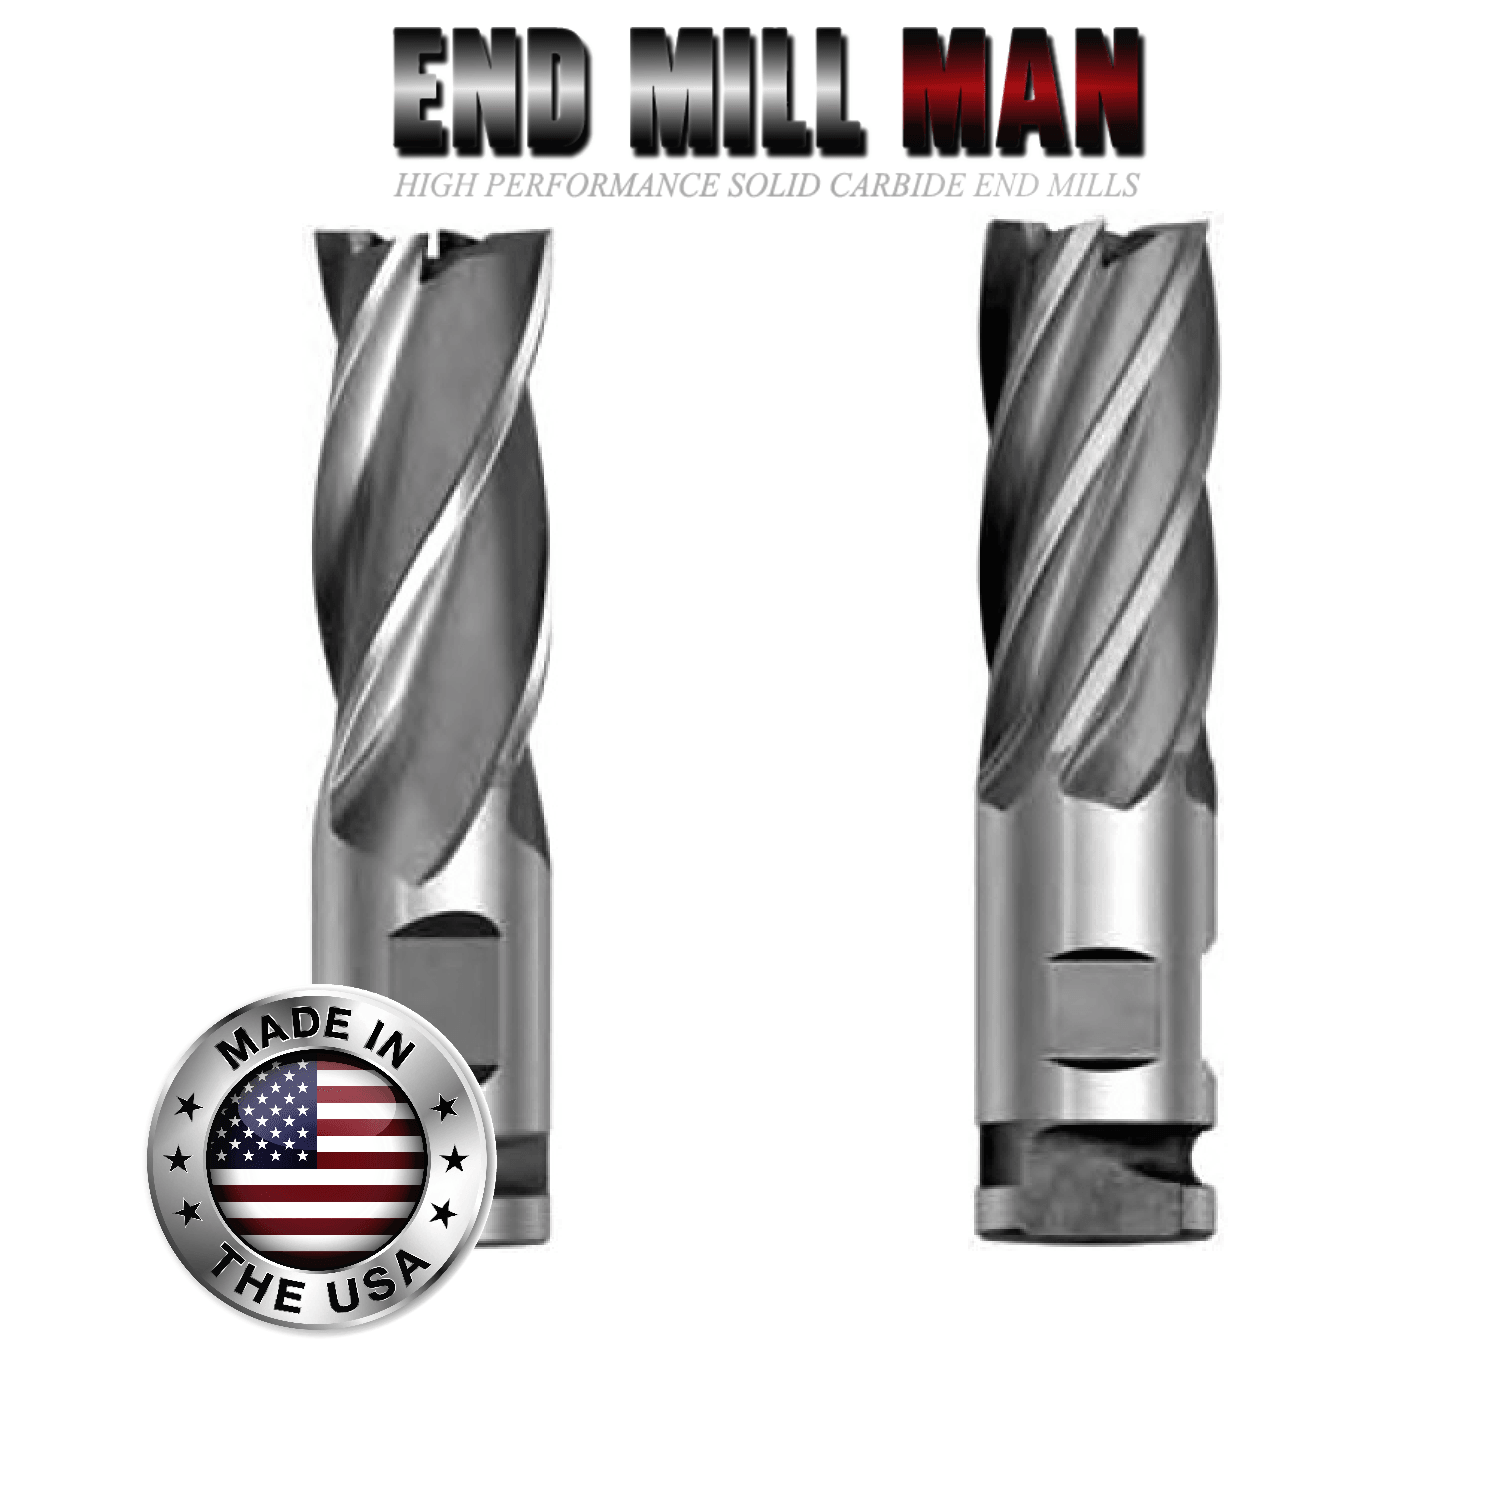 2" Dia. x 4" Cut Length Sure-Lock 4 and 6 Flute End Mill (2" Shank) - The End Mill Store 